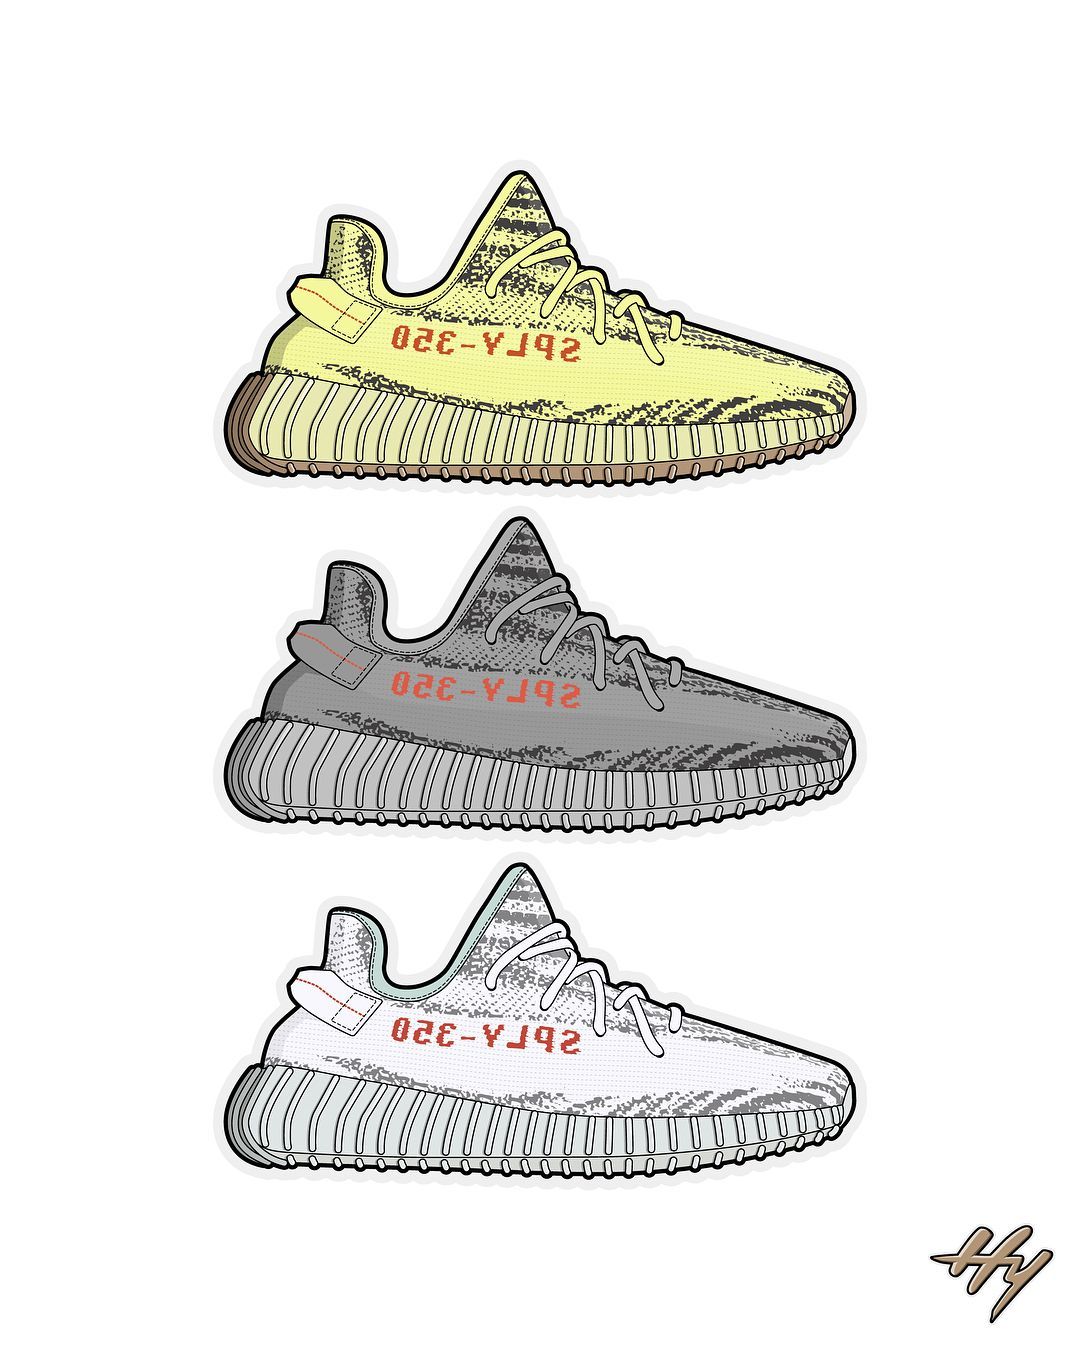 Yeezy Shoes Cartoon Wallpapers on WallpaperDog